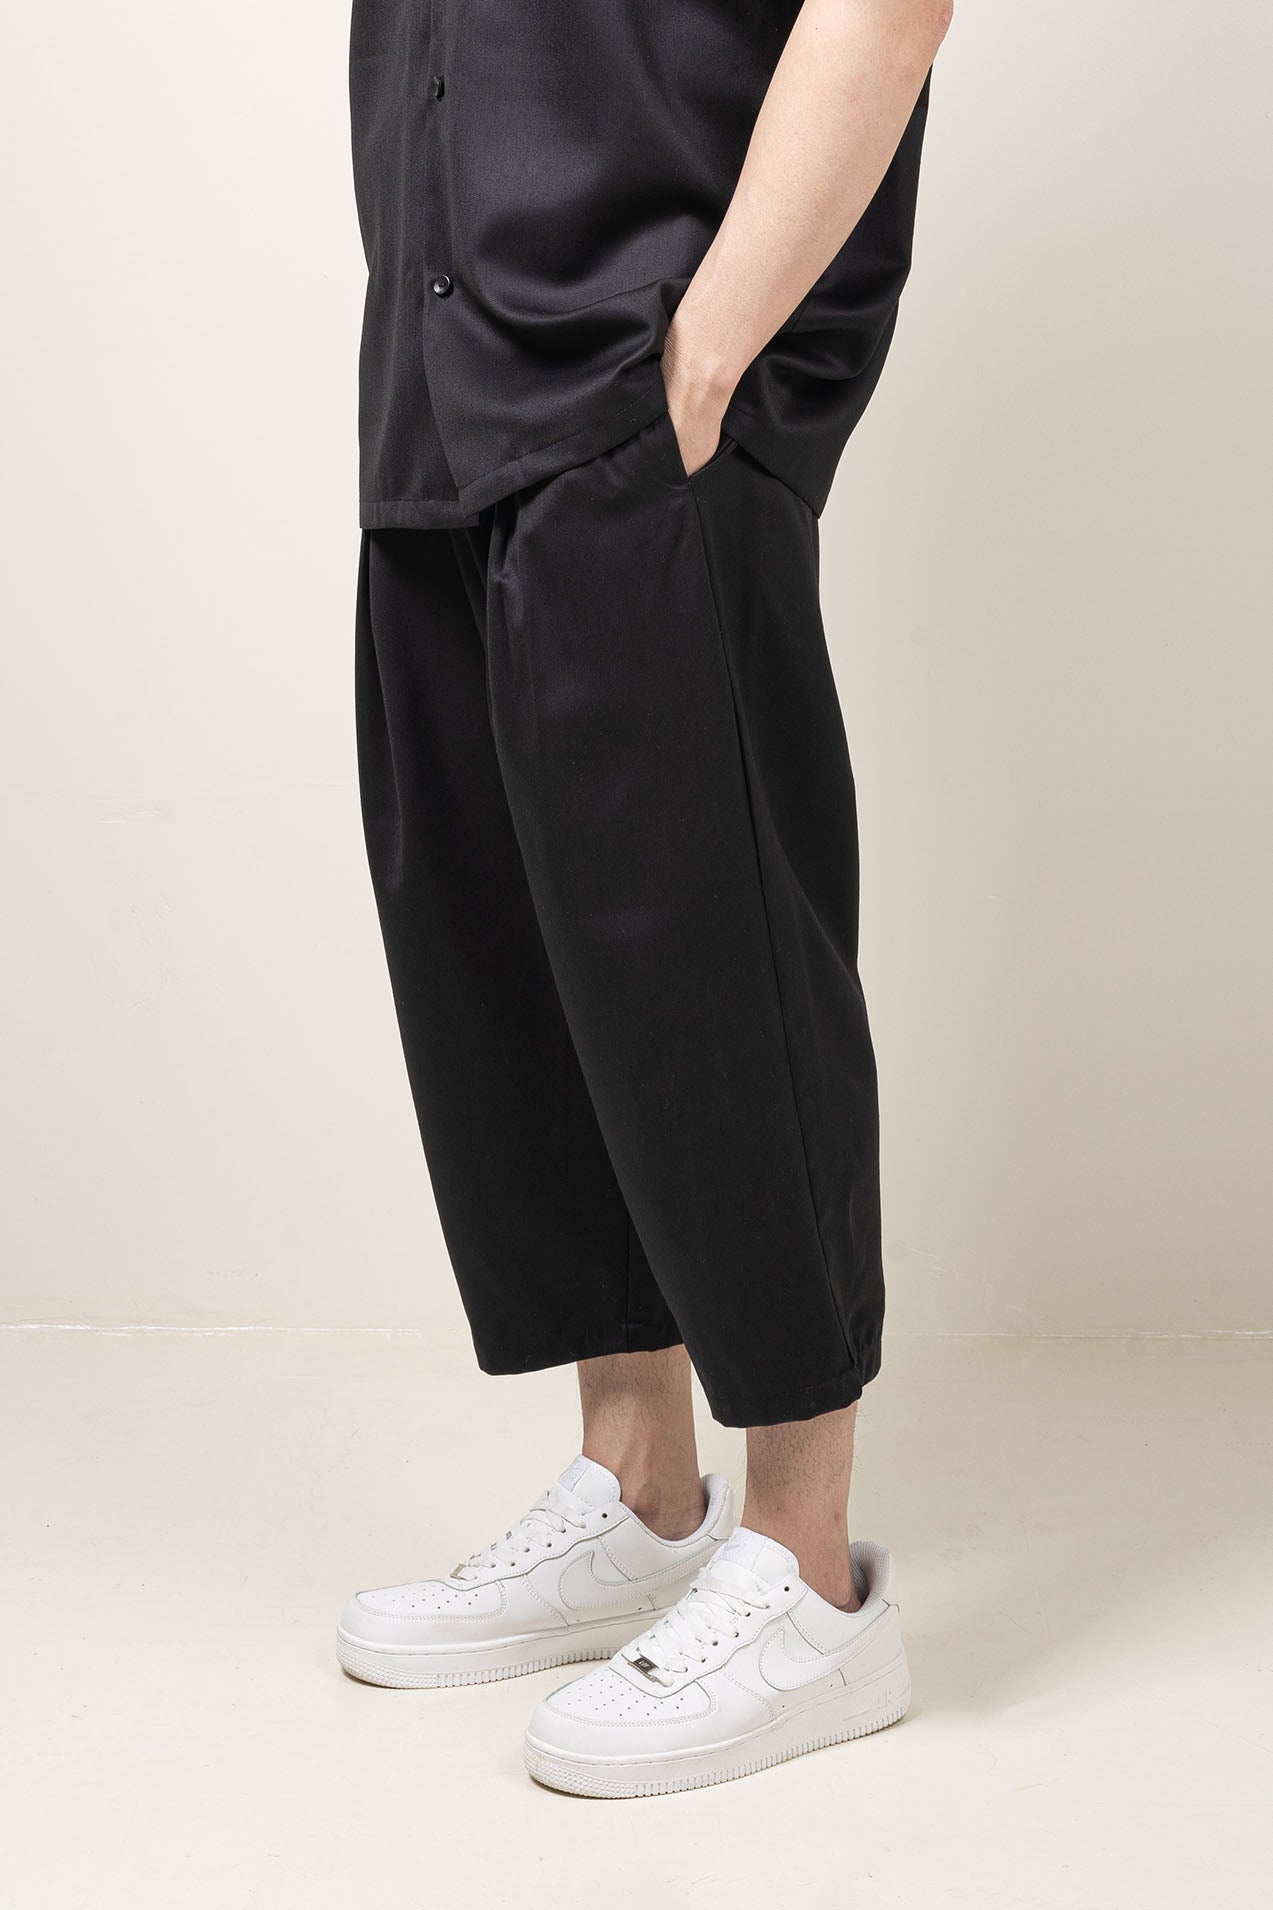 Straight leg fit mid-rise pants with pocket at the side seams and pleat details and elastic waistband.